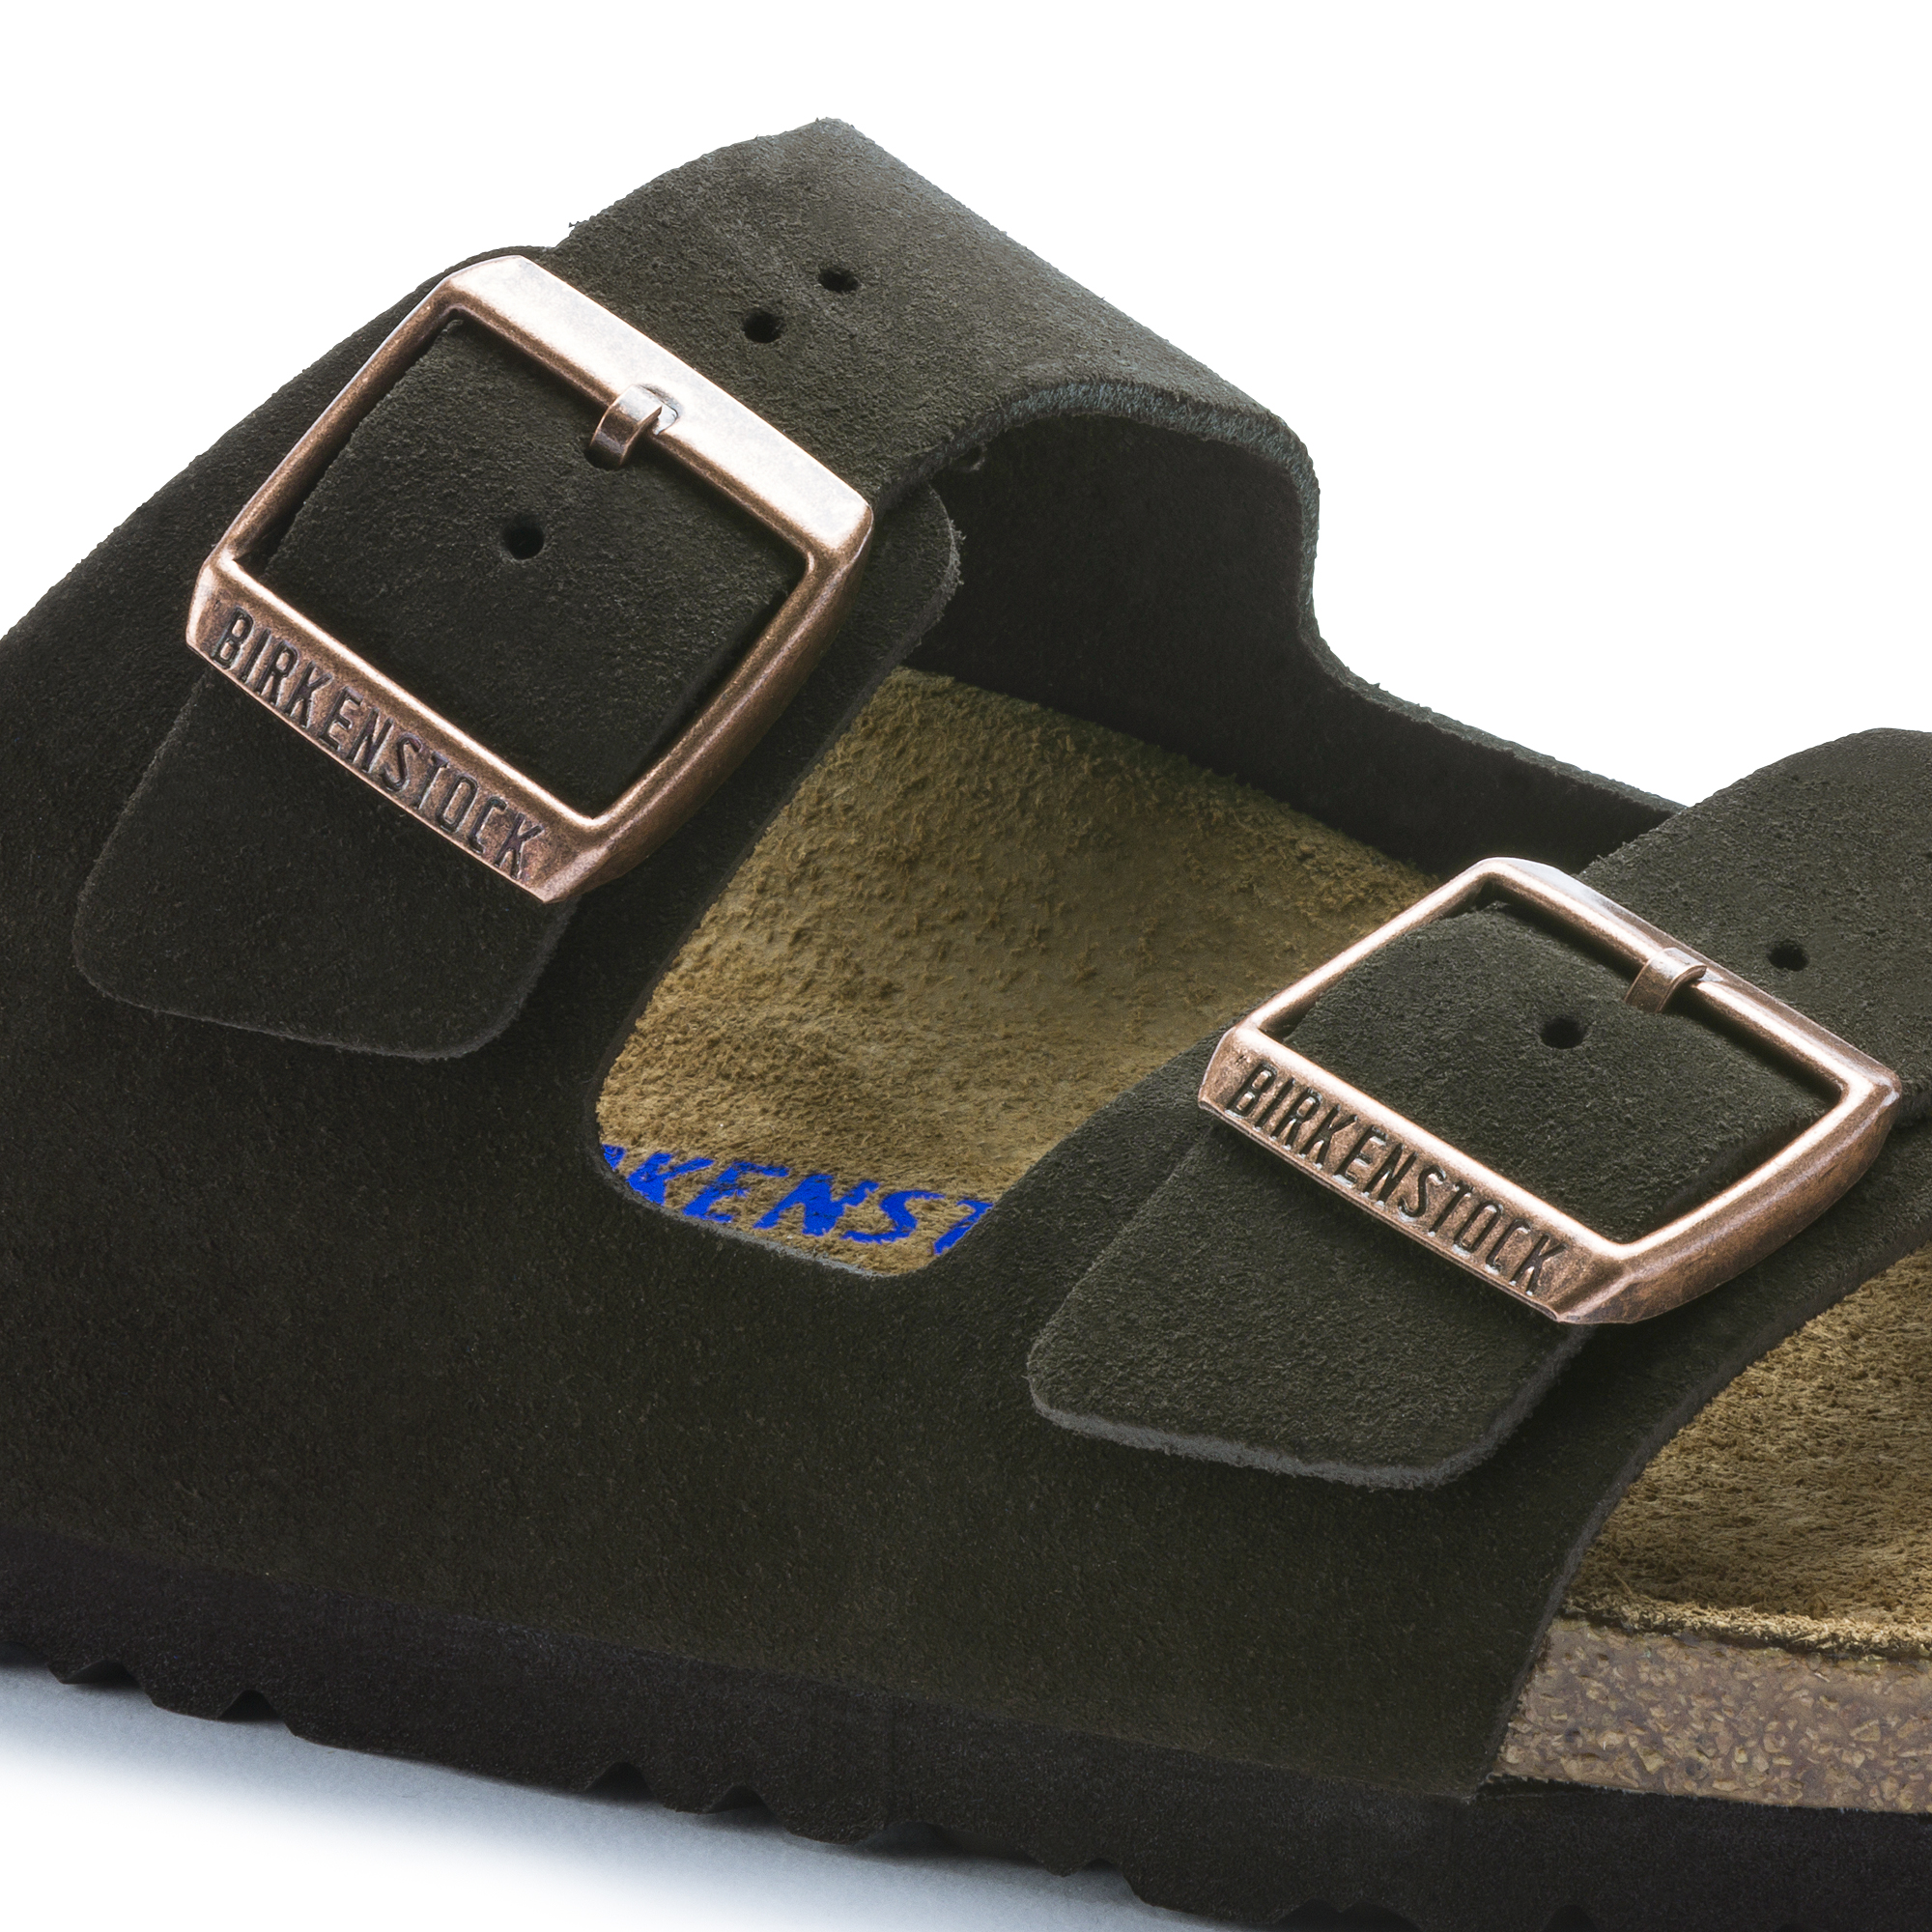 W ARIZONA SOFT FOOTBED SUEDE - Mosser Shoes